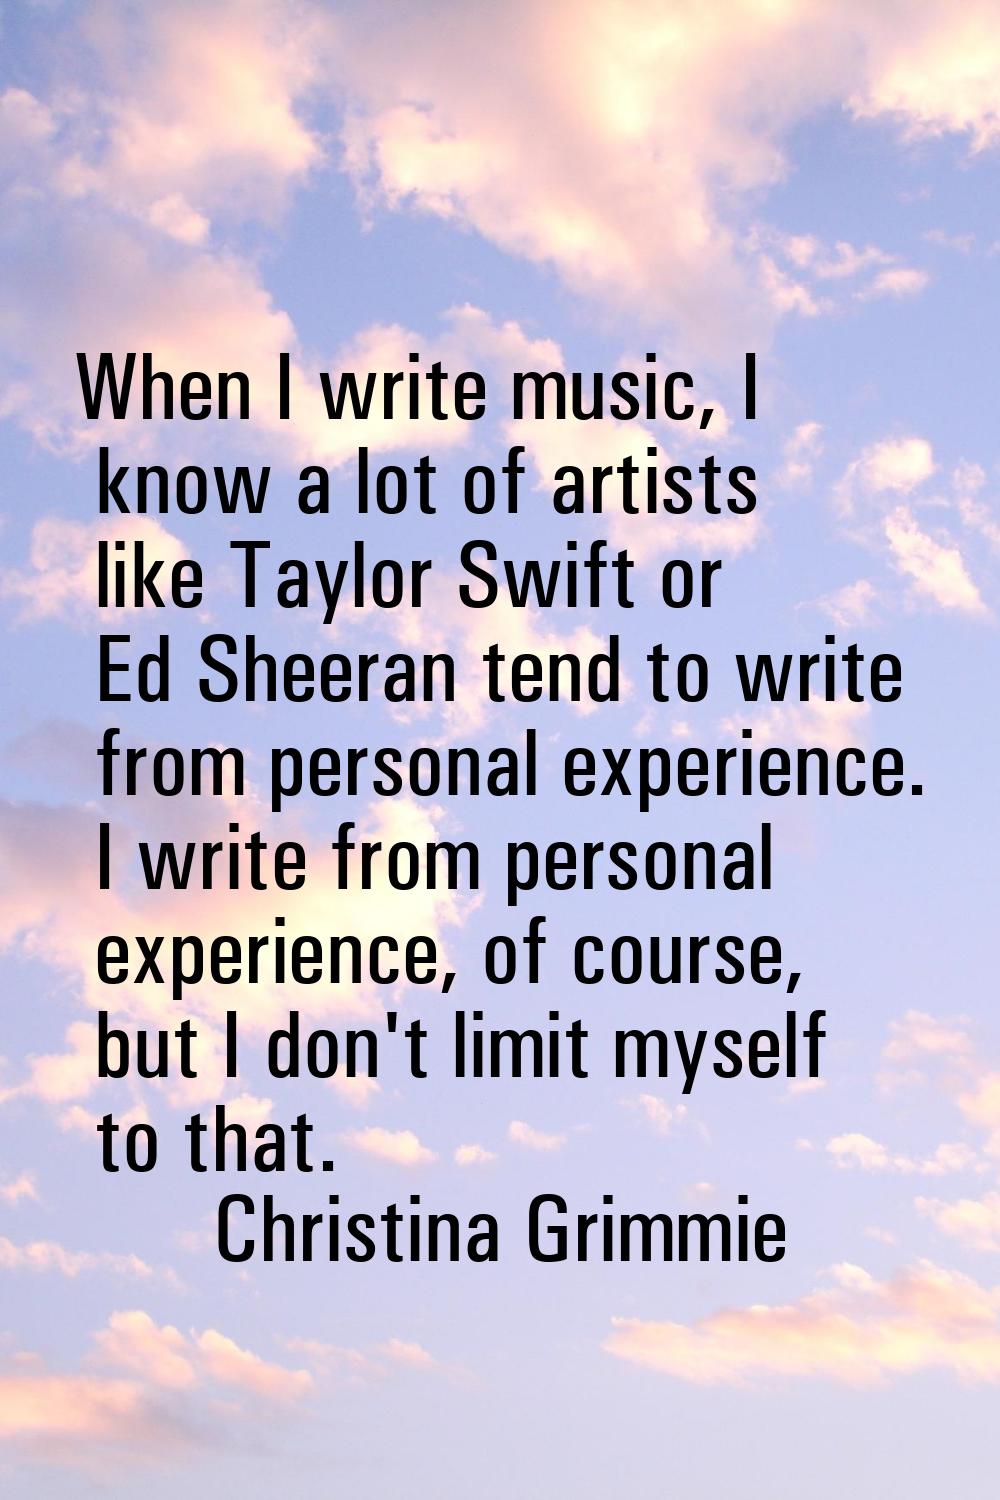 When I write music, I know a lot of artists like Taylor Swift or Ed Sheeran tend to write from pers